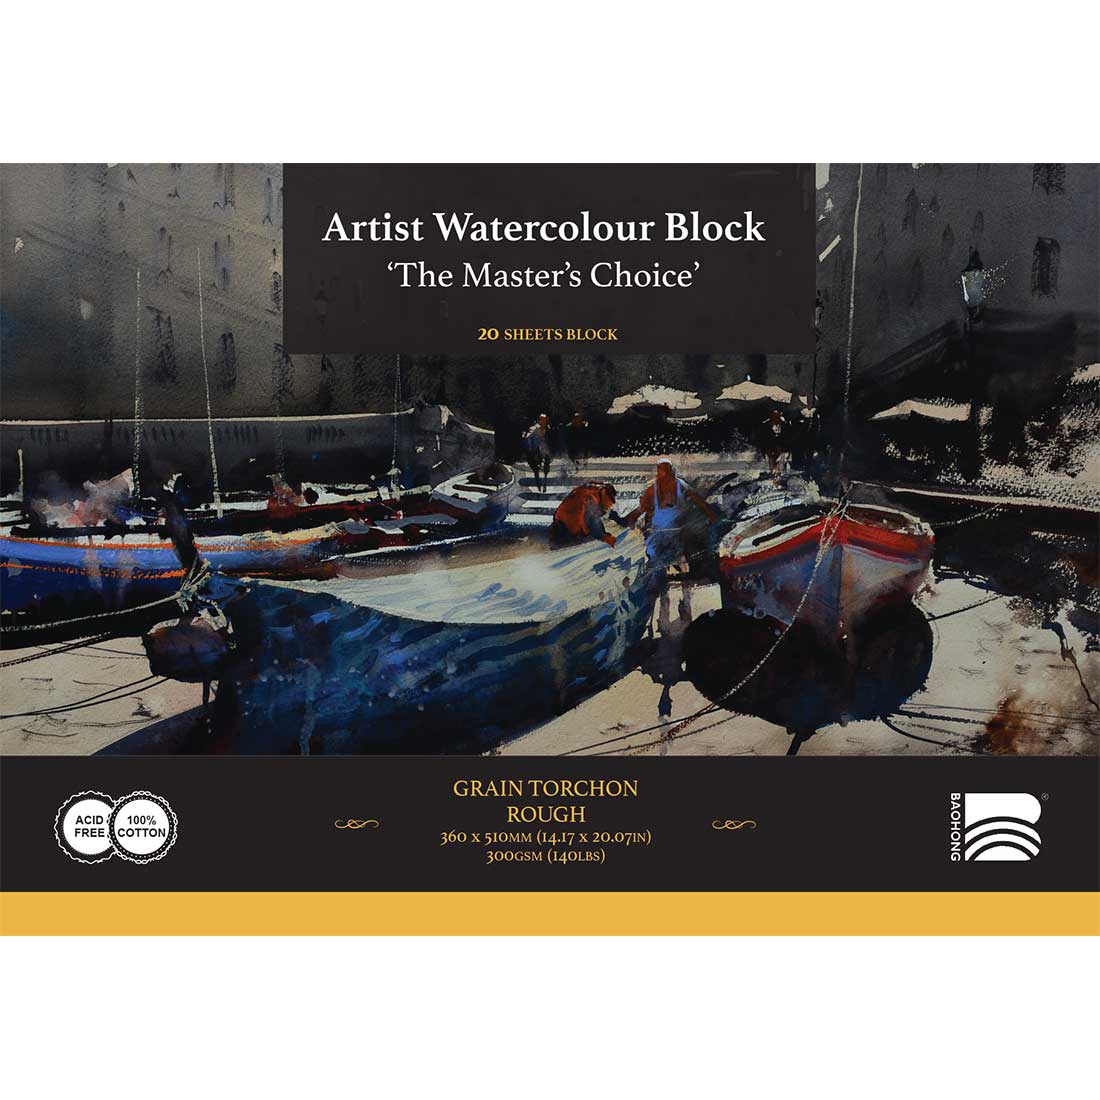 Masters Choice Watercolour Blocks are available in-store and online at The Paintbox, home of the widest range of traditional and progressive Discount Art Supplies in Adelaide.